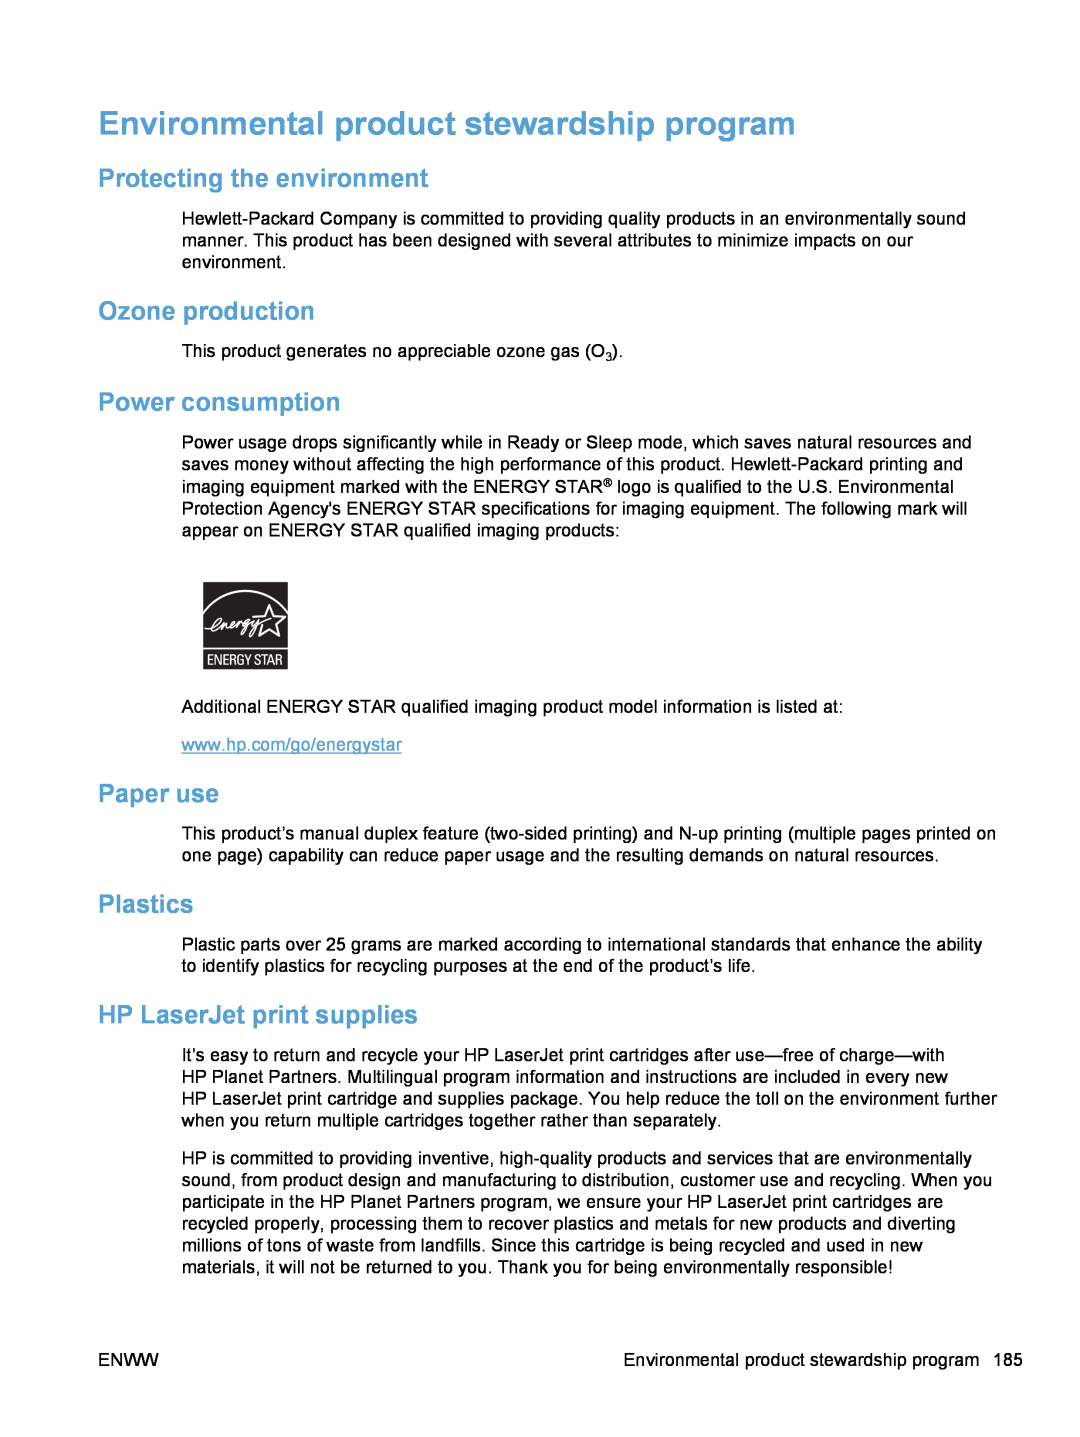 HP 100 COLOR MFP M175 Environmental product stewardship program, Protecting the environment, Ozone production, Paper use 